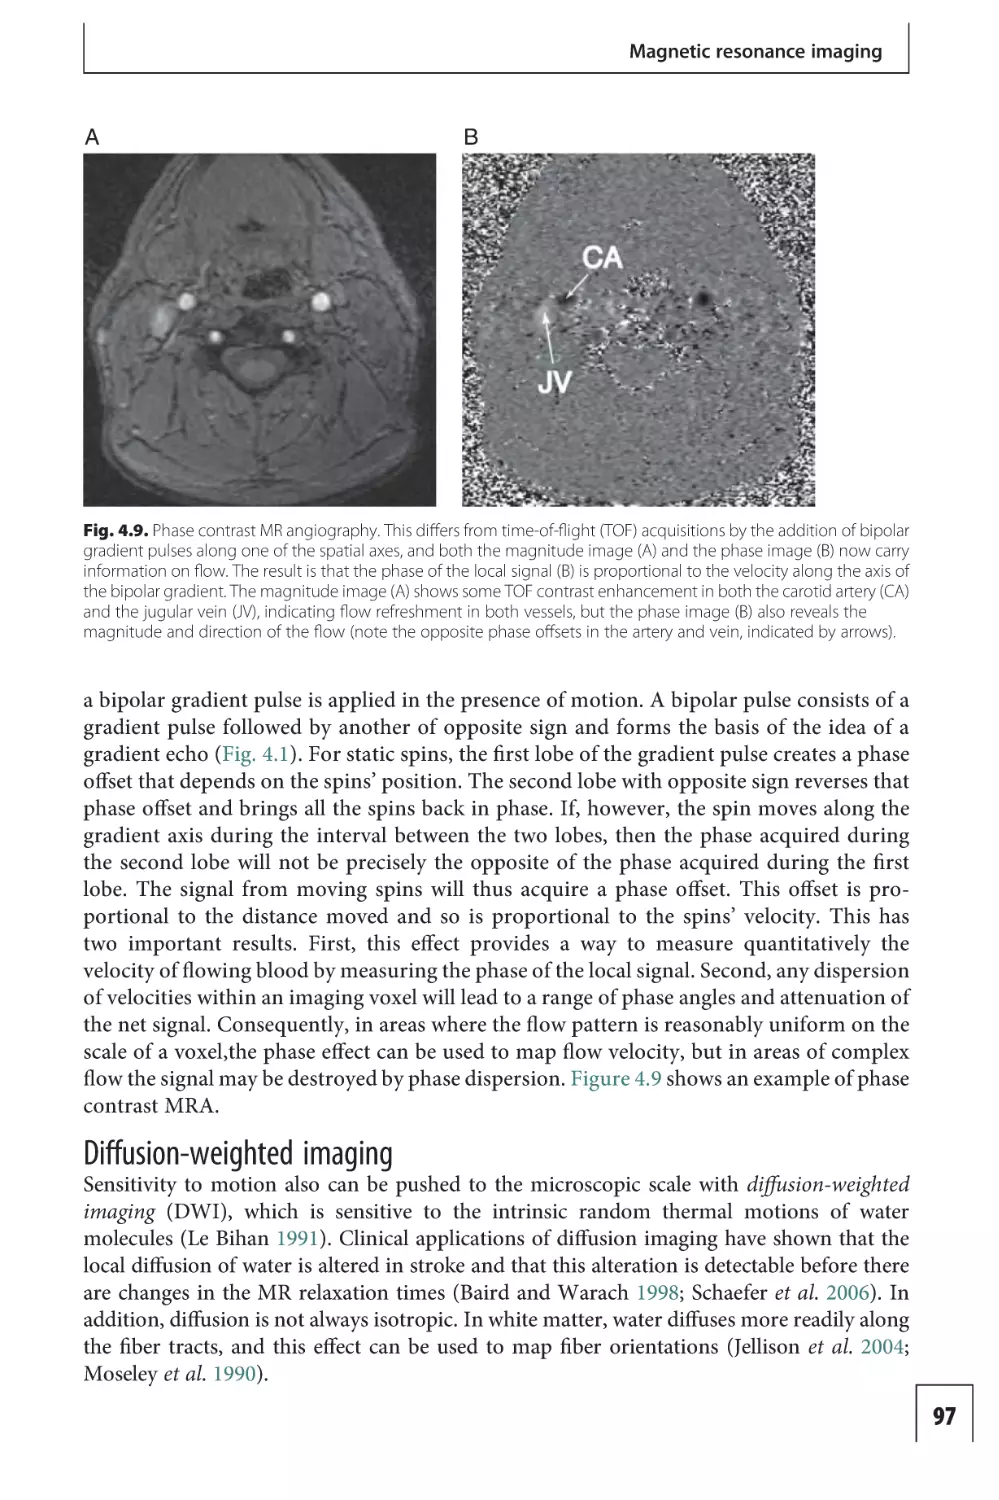 Diffusion-weighted imaging